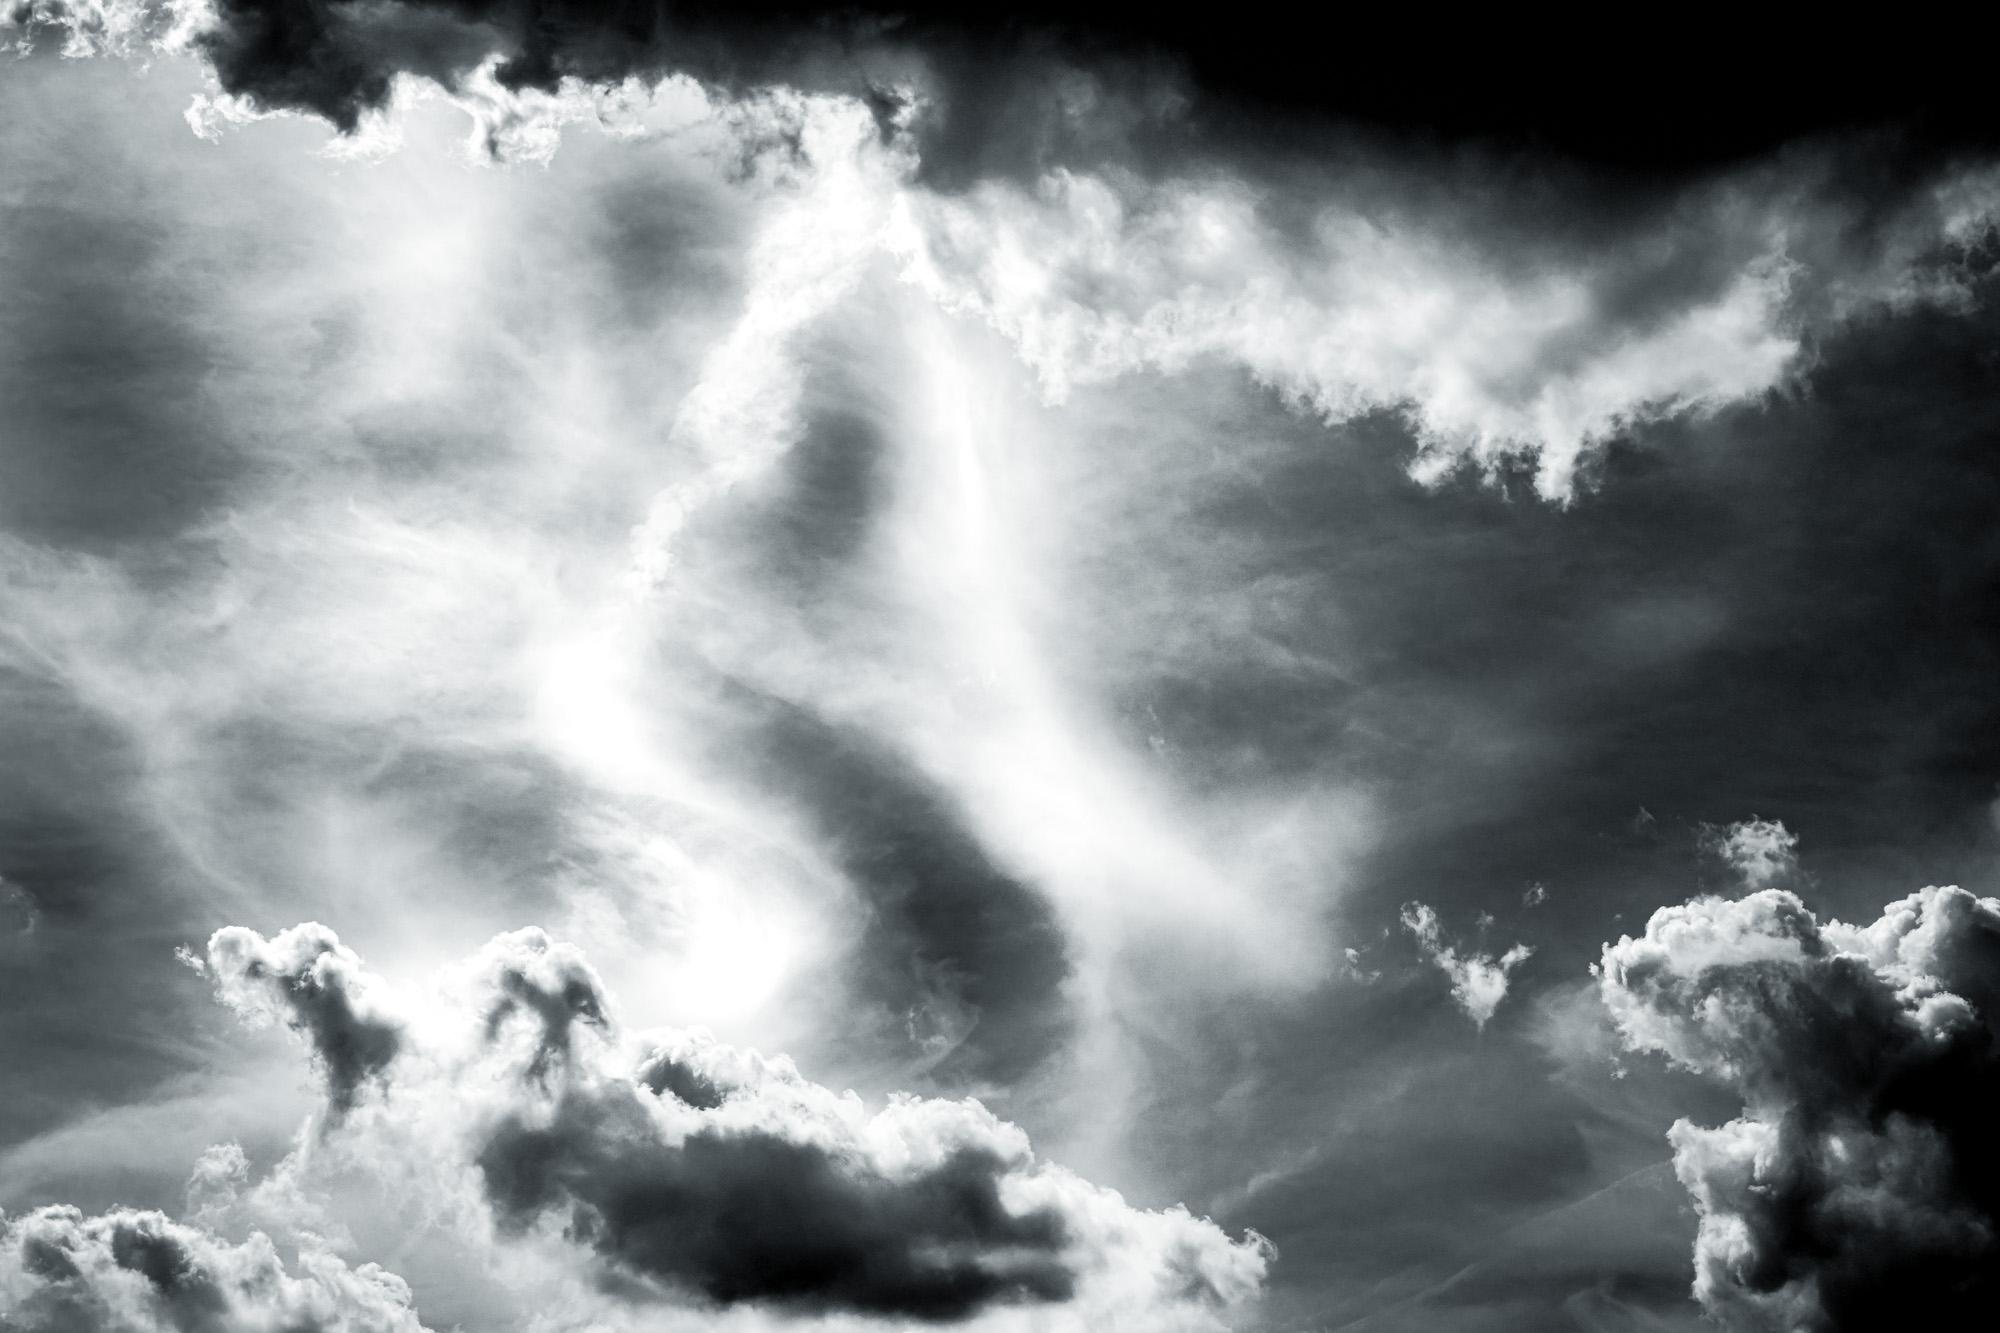 Howard Lewis Landscape Photograph - Limited Edition Black and White Photograph - " Howling Sky " 20 x 24